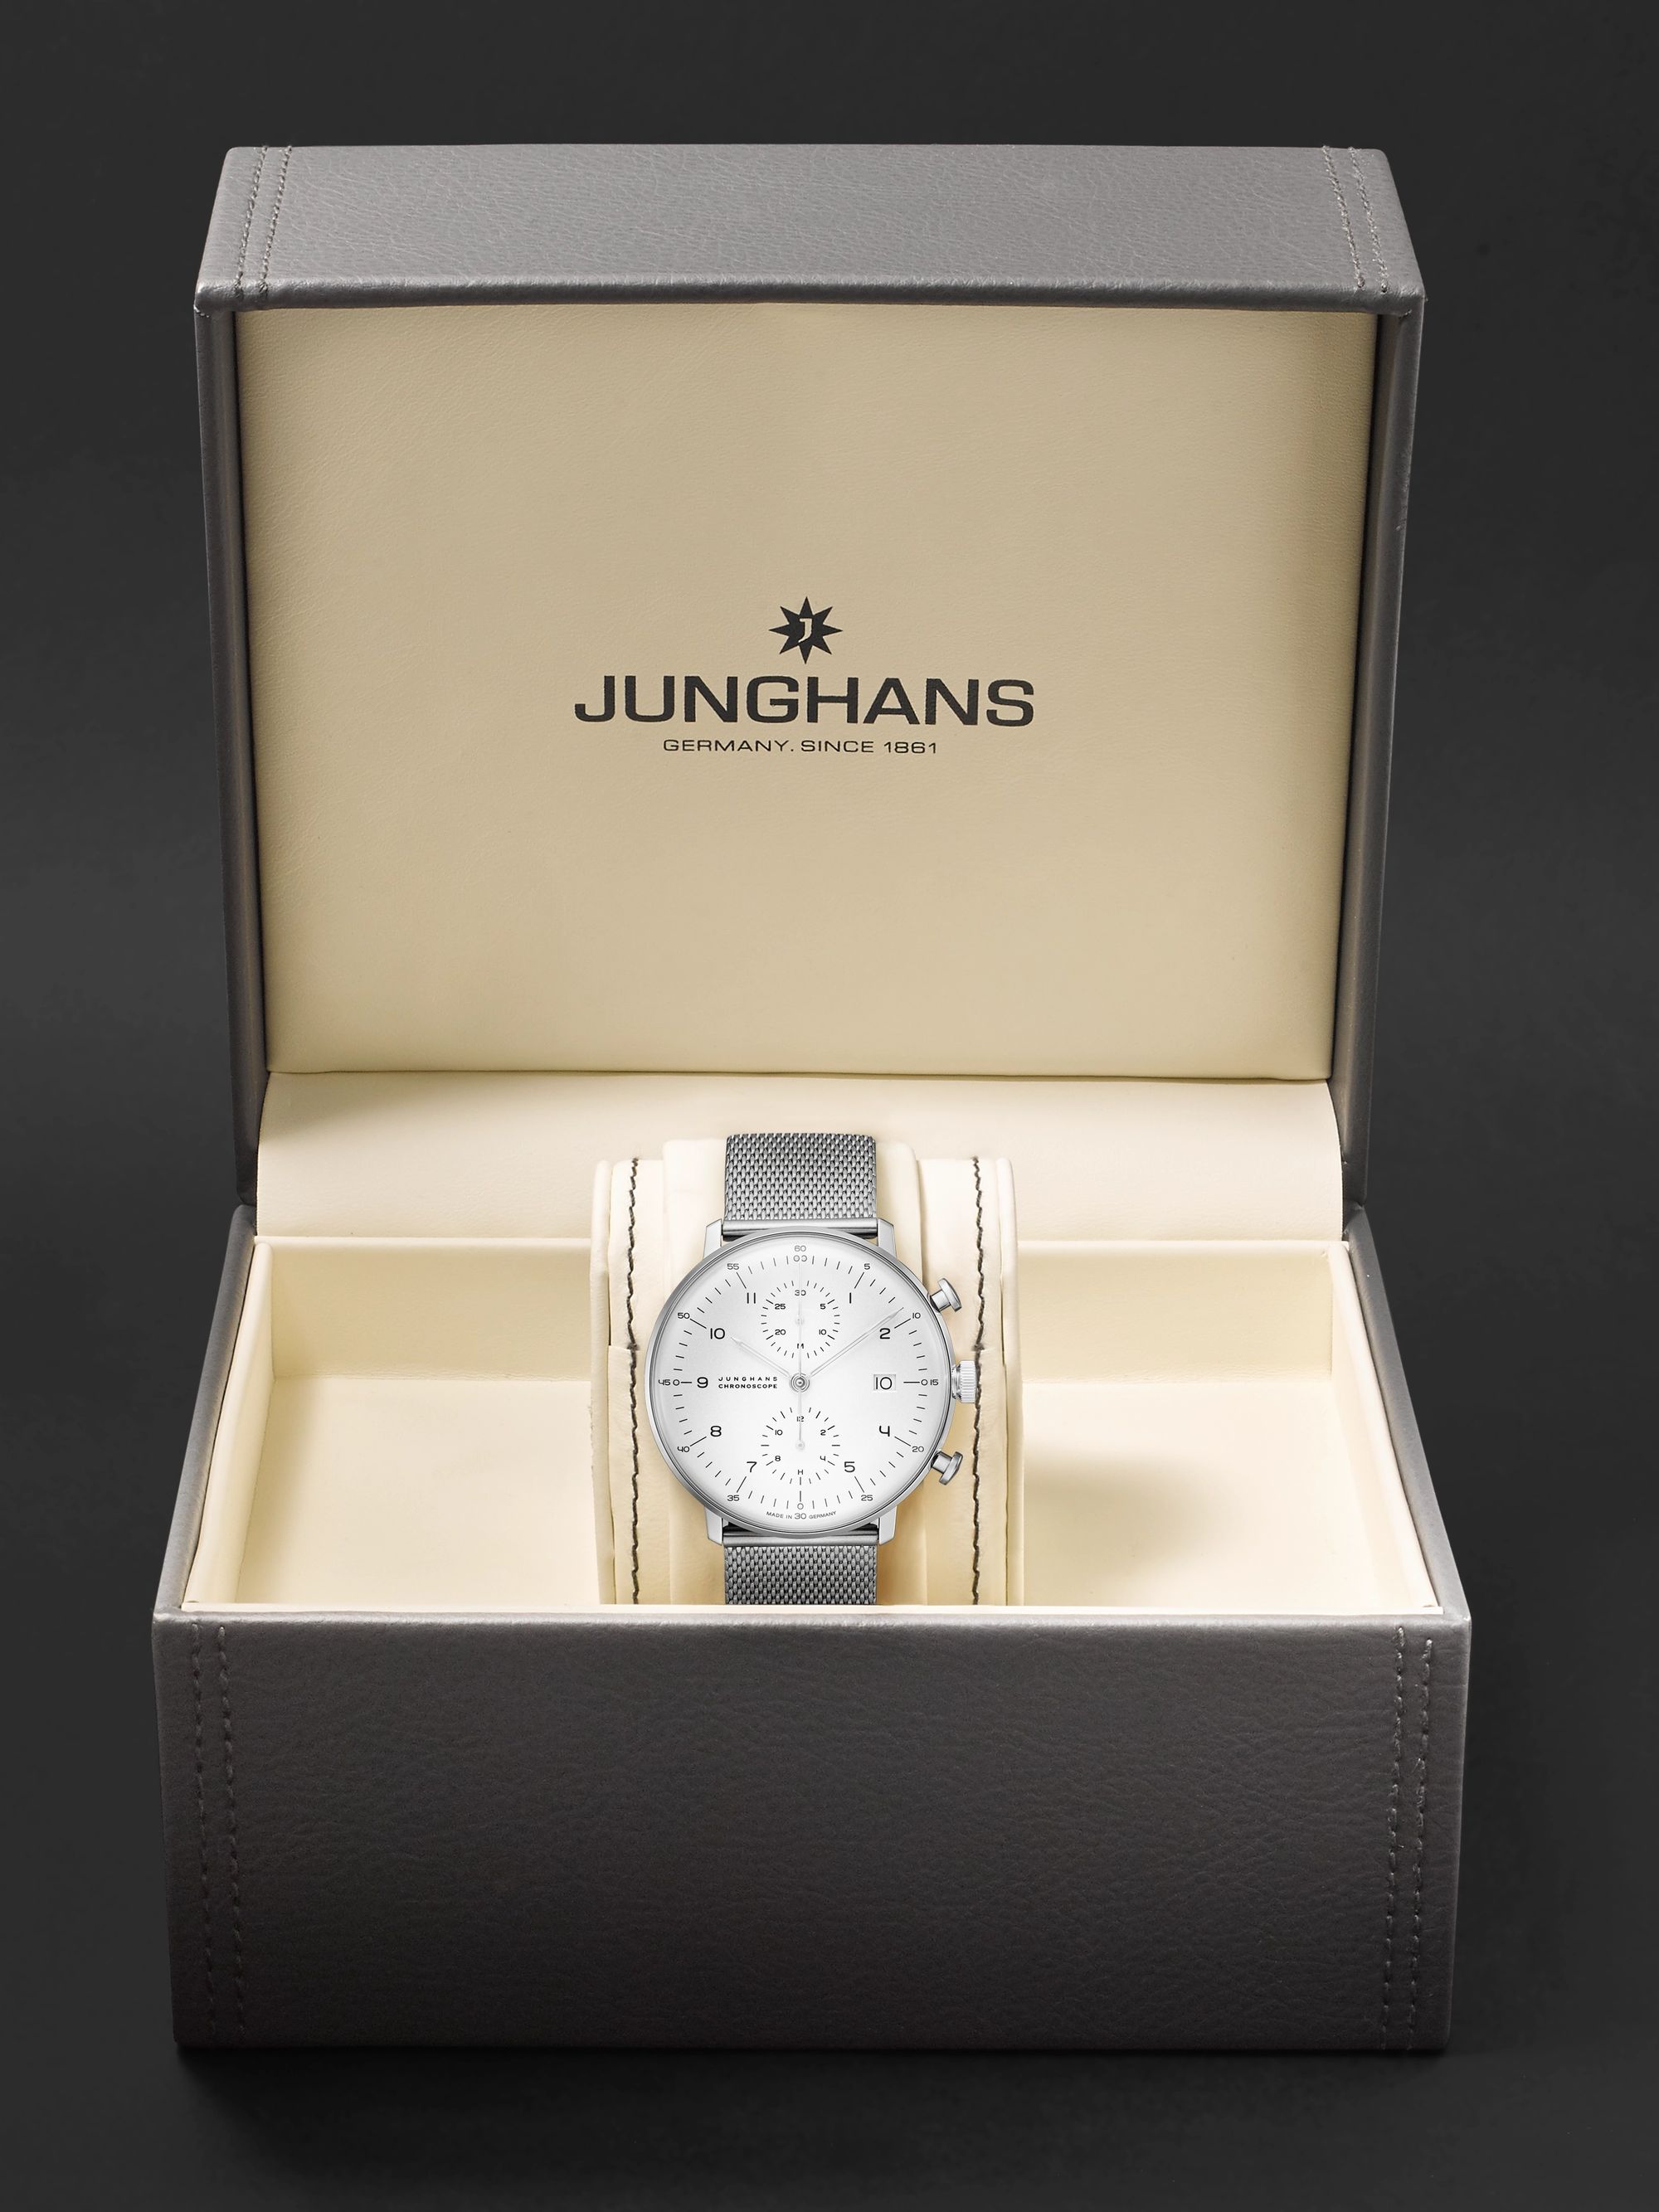 JUNGHANS Max Bill Chronoscope Automatic 40mm Stainless Steel Watch, Ref. No. 027/4003.48